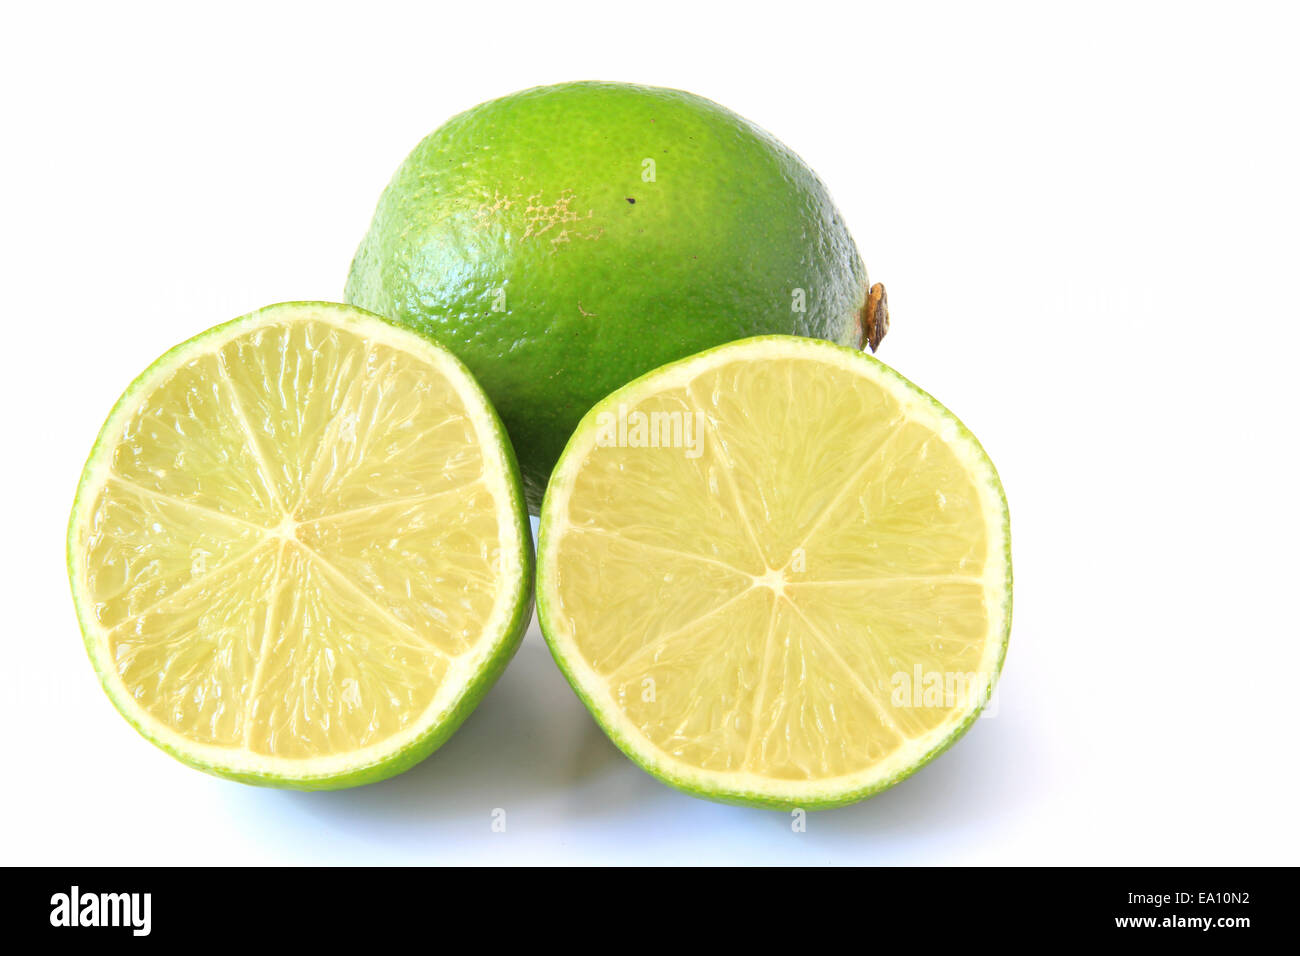 Lime fruits Stock Photo